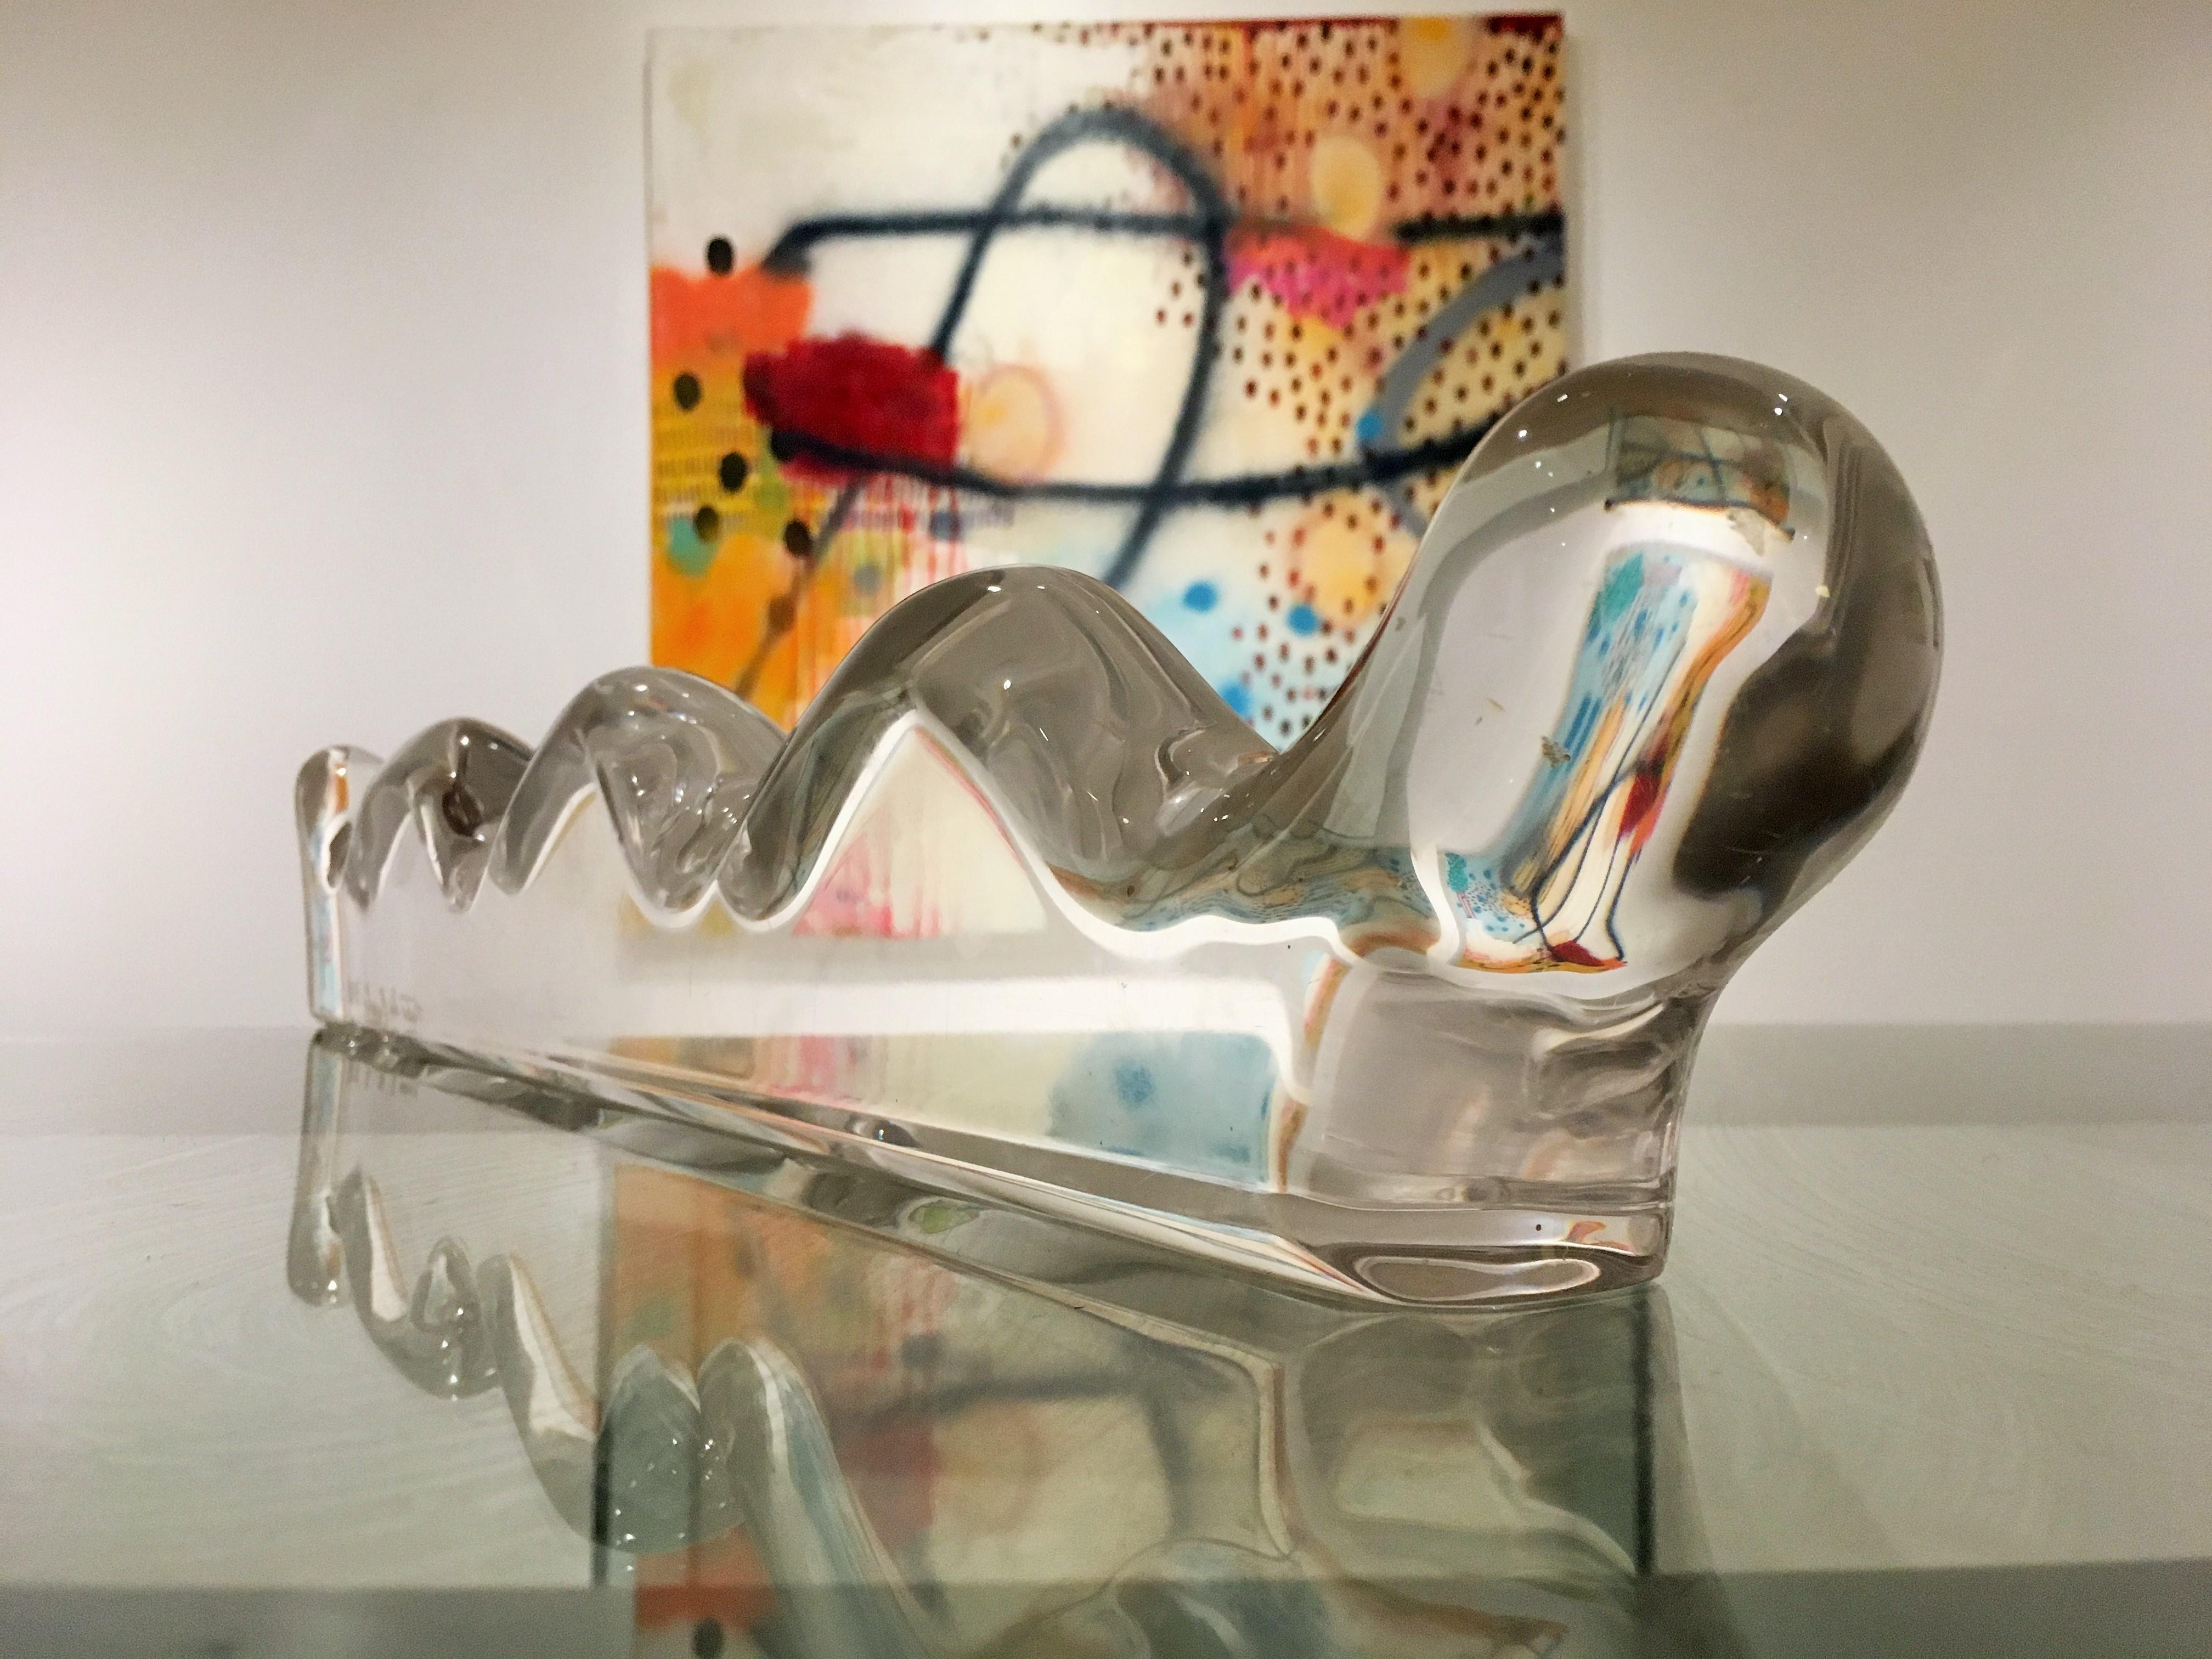 Lucite caterpillar sculpture by Keith G. Kersch, 1988. This beautiful caterpillar as an accent piece for a desk, tabletop, or elsewhere in the line of sight would be good cause for wonder and relaxation. 



